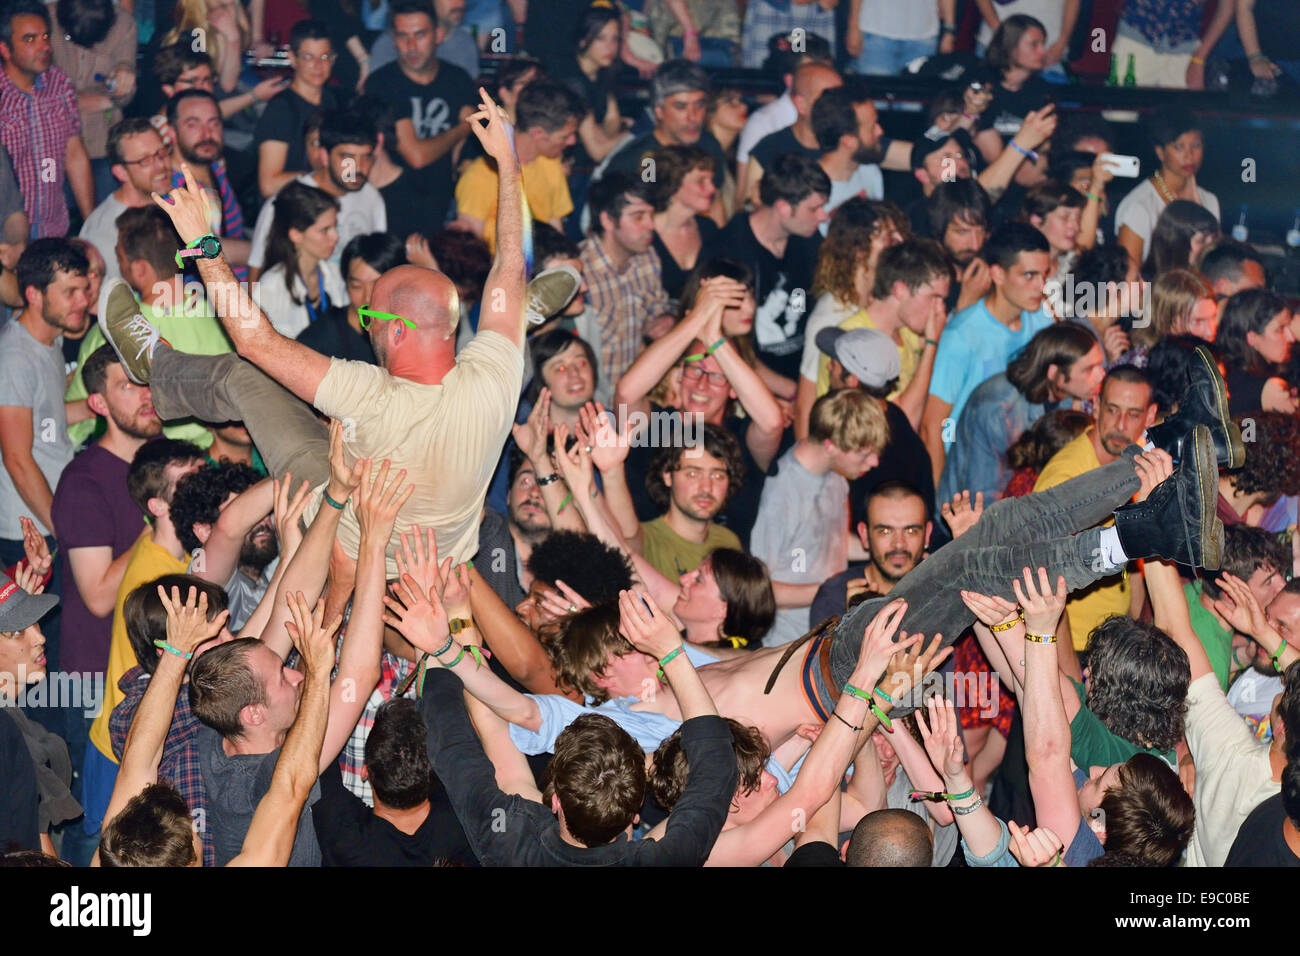 BARCELONA - MAY 30: The audience doing crowd surfing (also known as mosh pit) at Heineken Primavera Sound 2014 Festival. Stock Photo